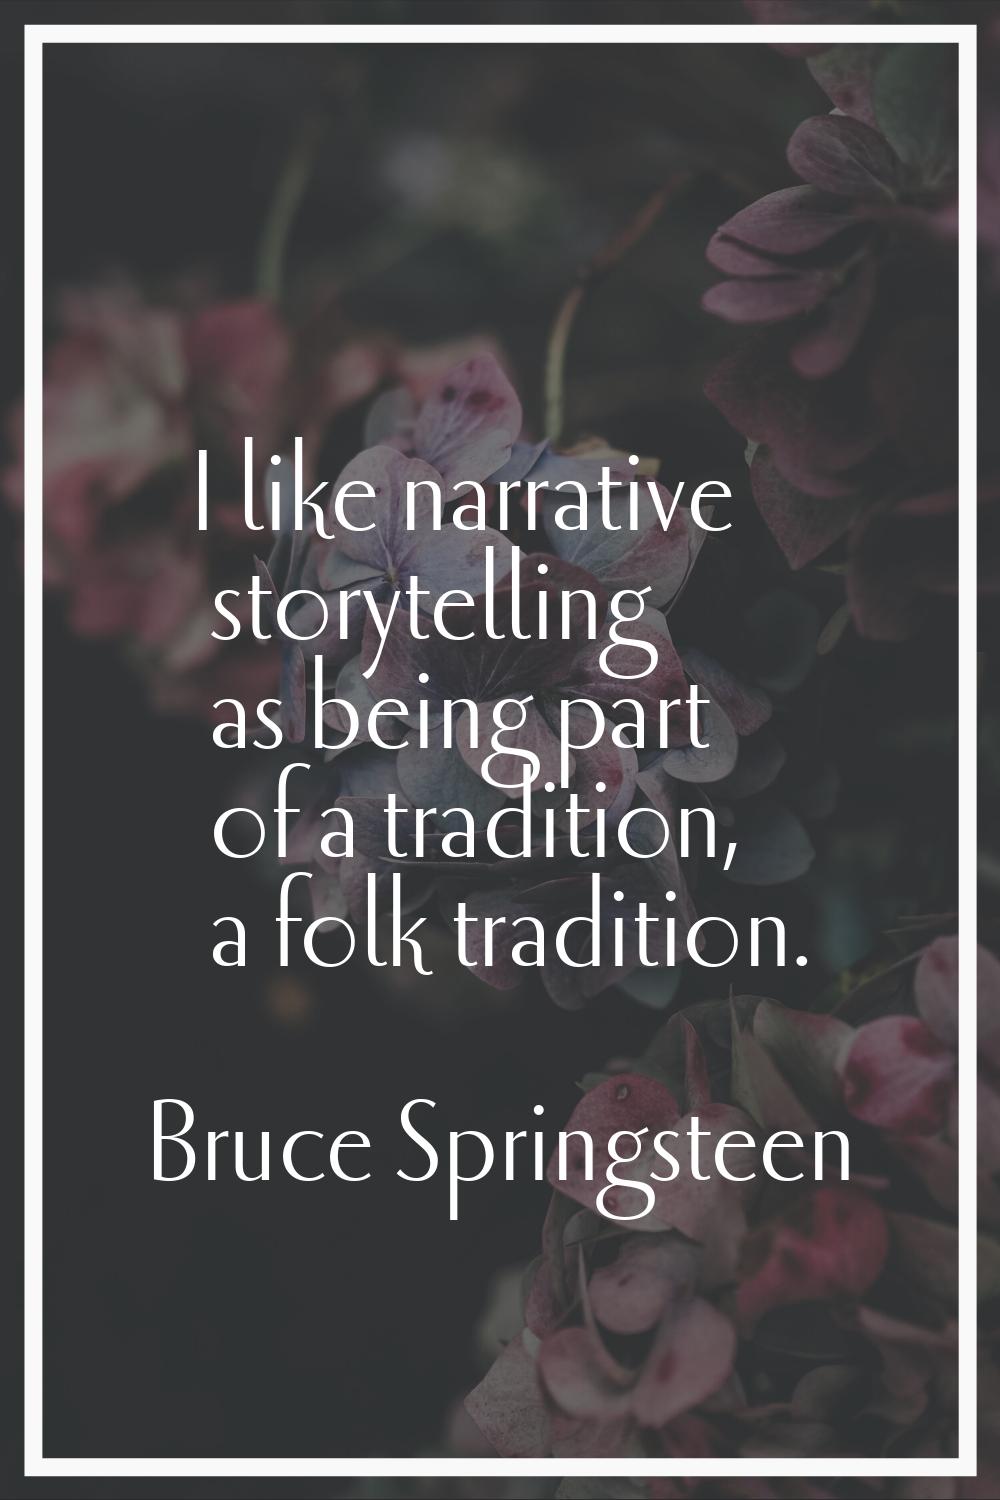 I like narrative storytelling as being part of a tradition, a folk tradition.